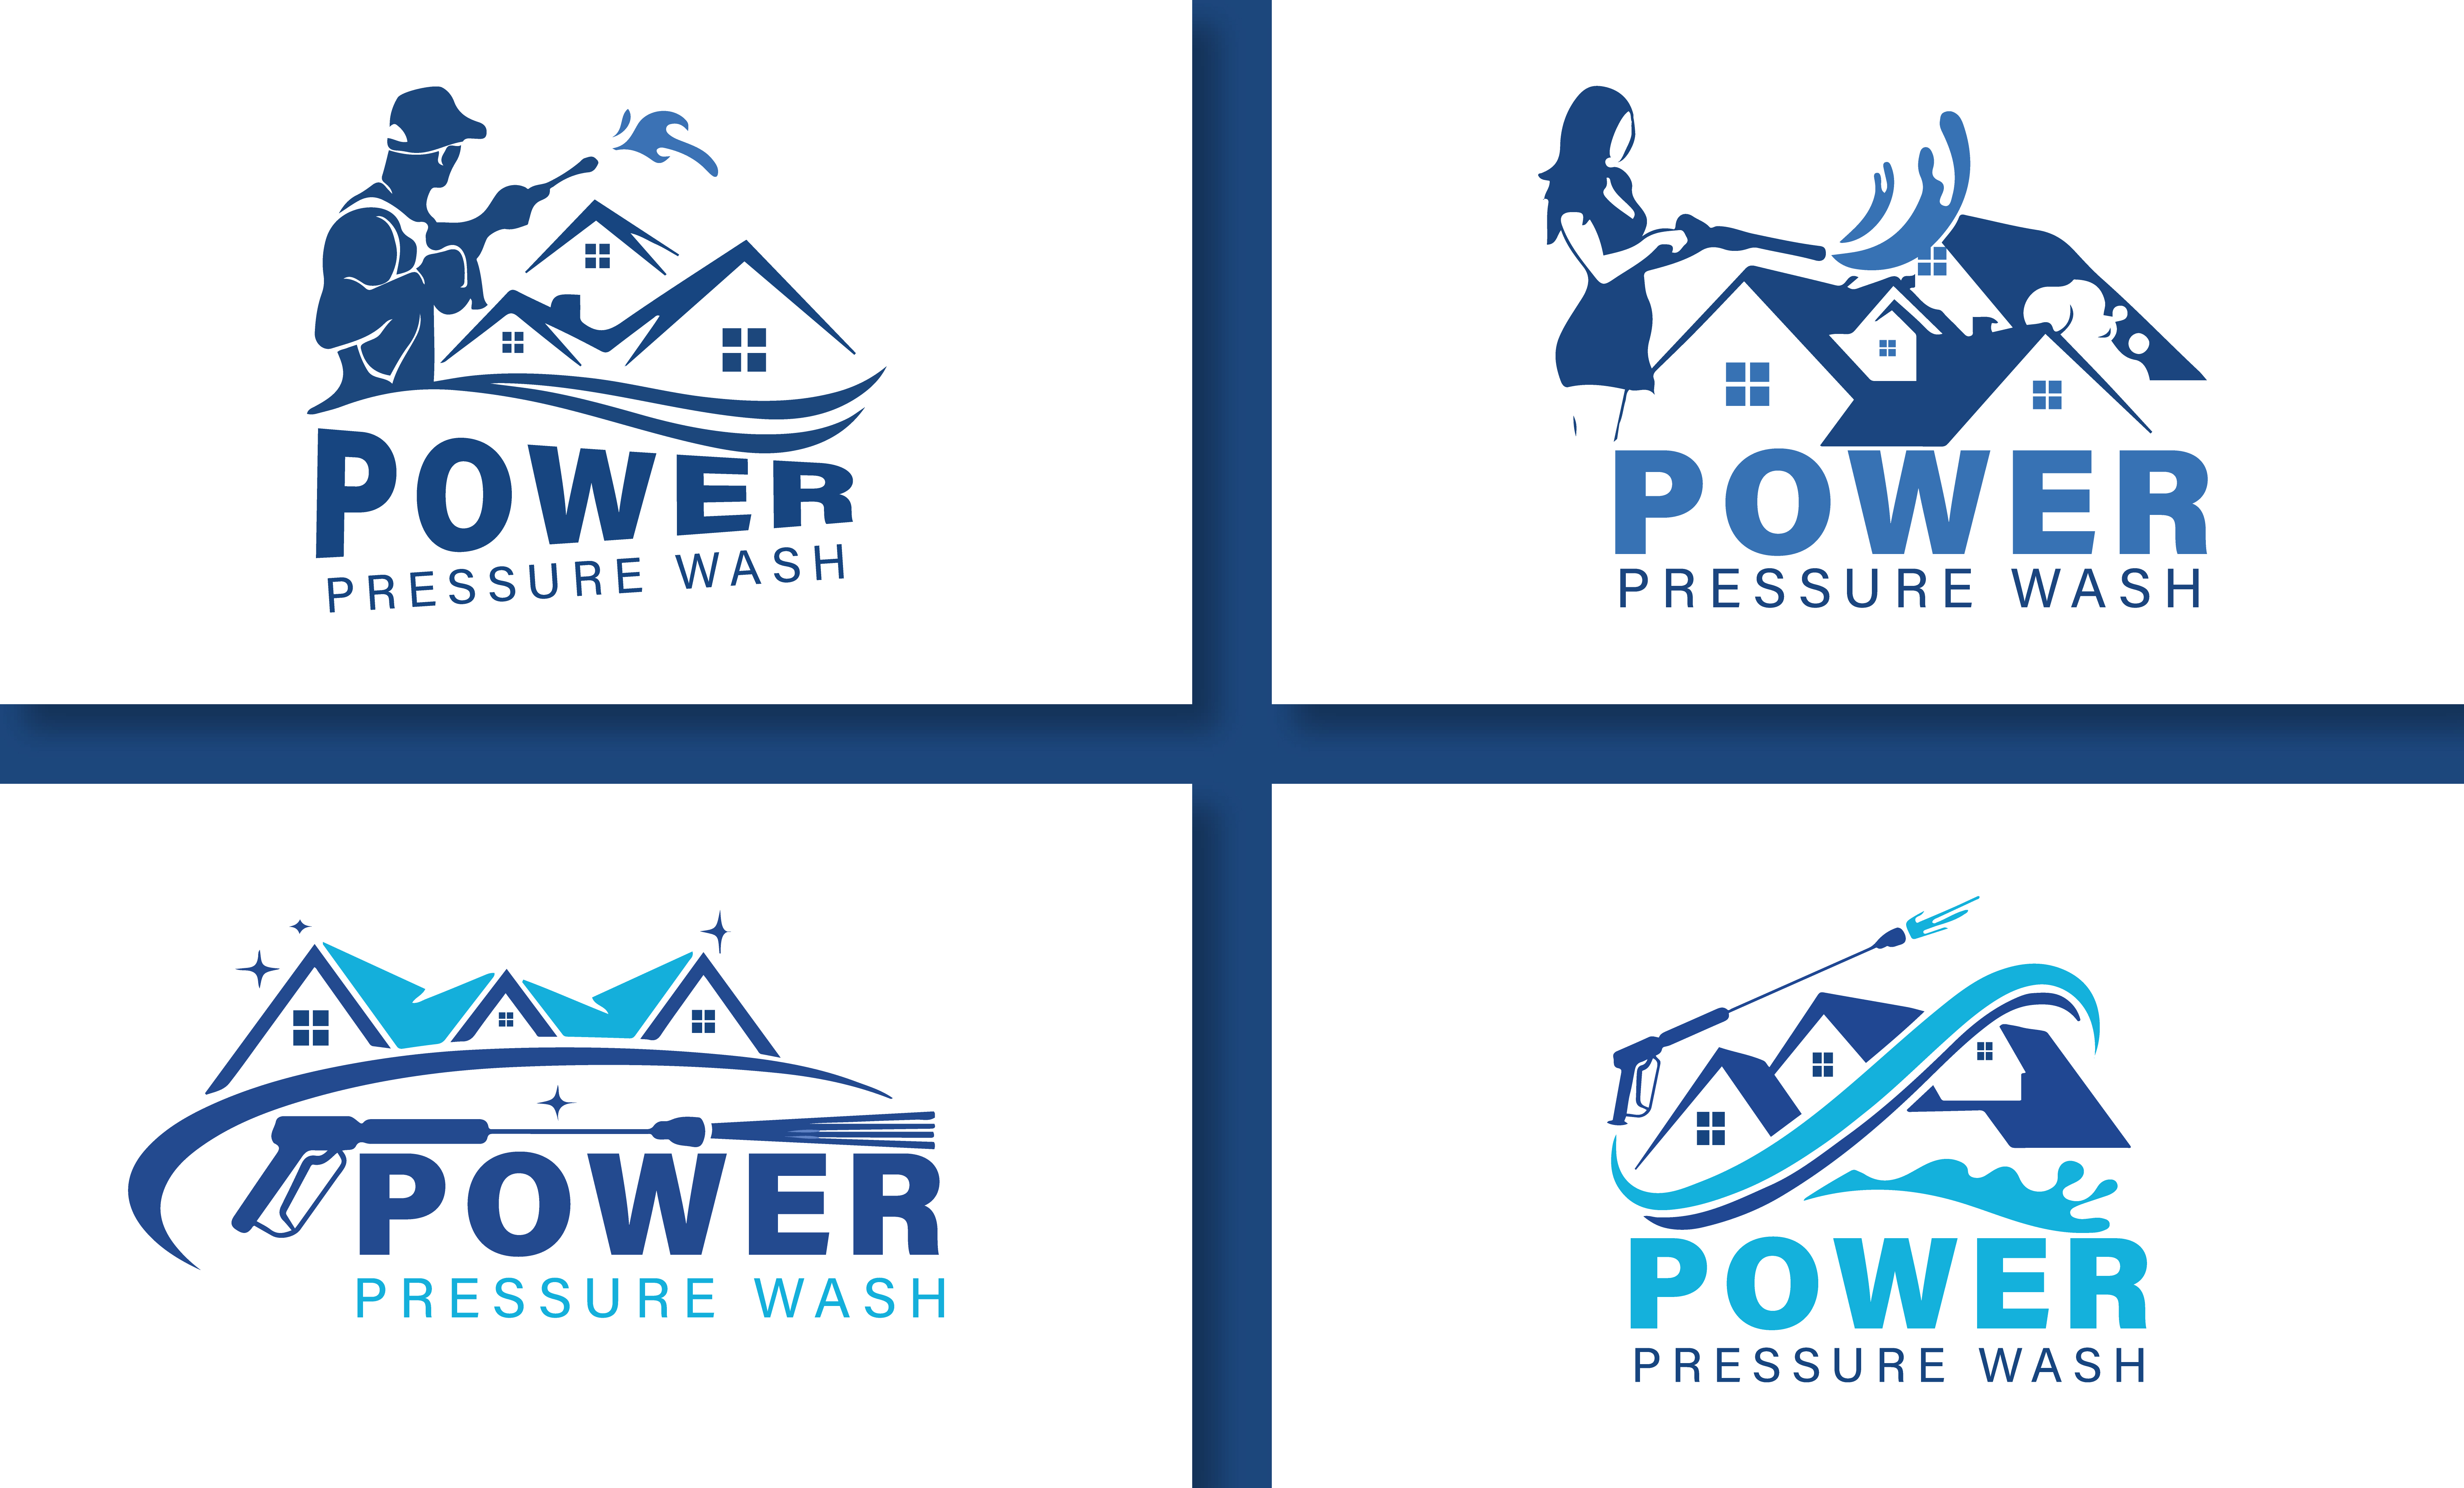 I will design pressure washing cleaning service power washing logo for you